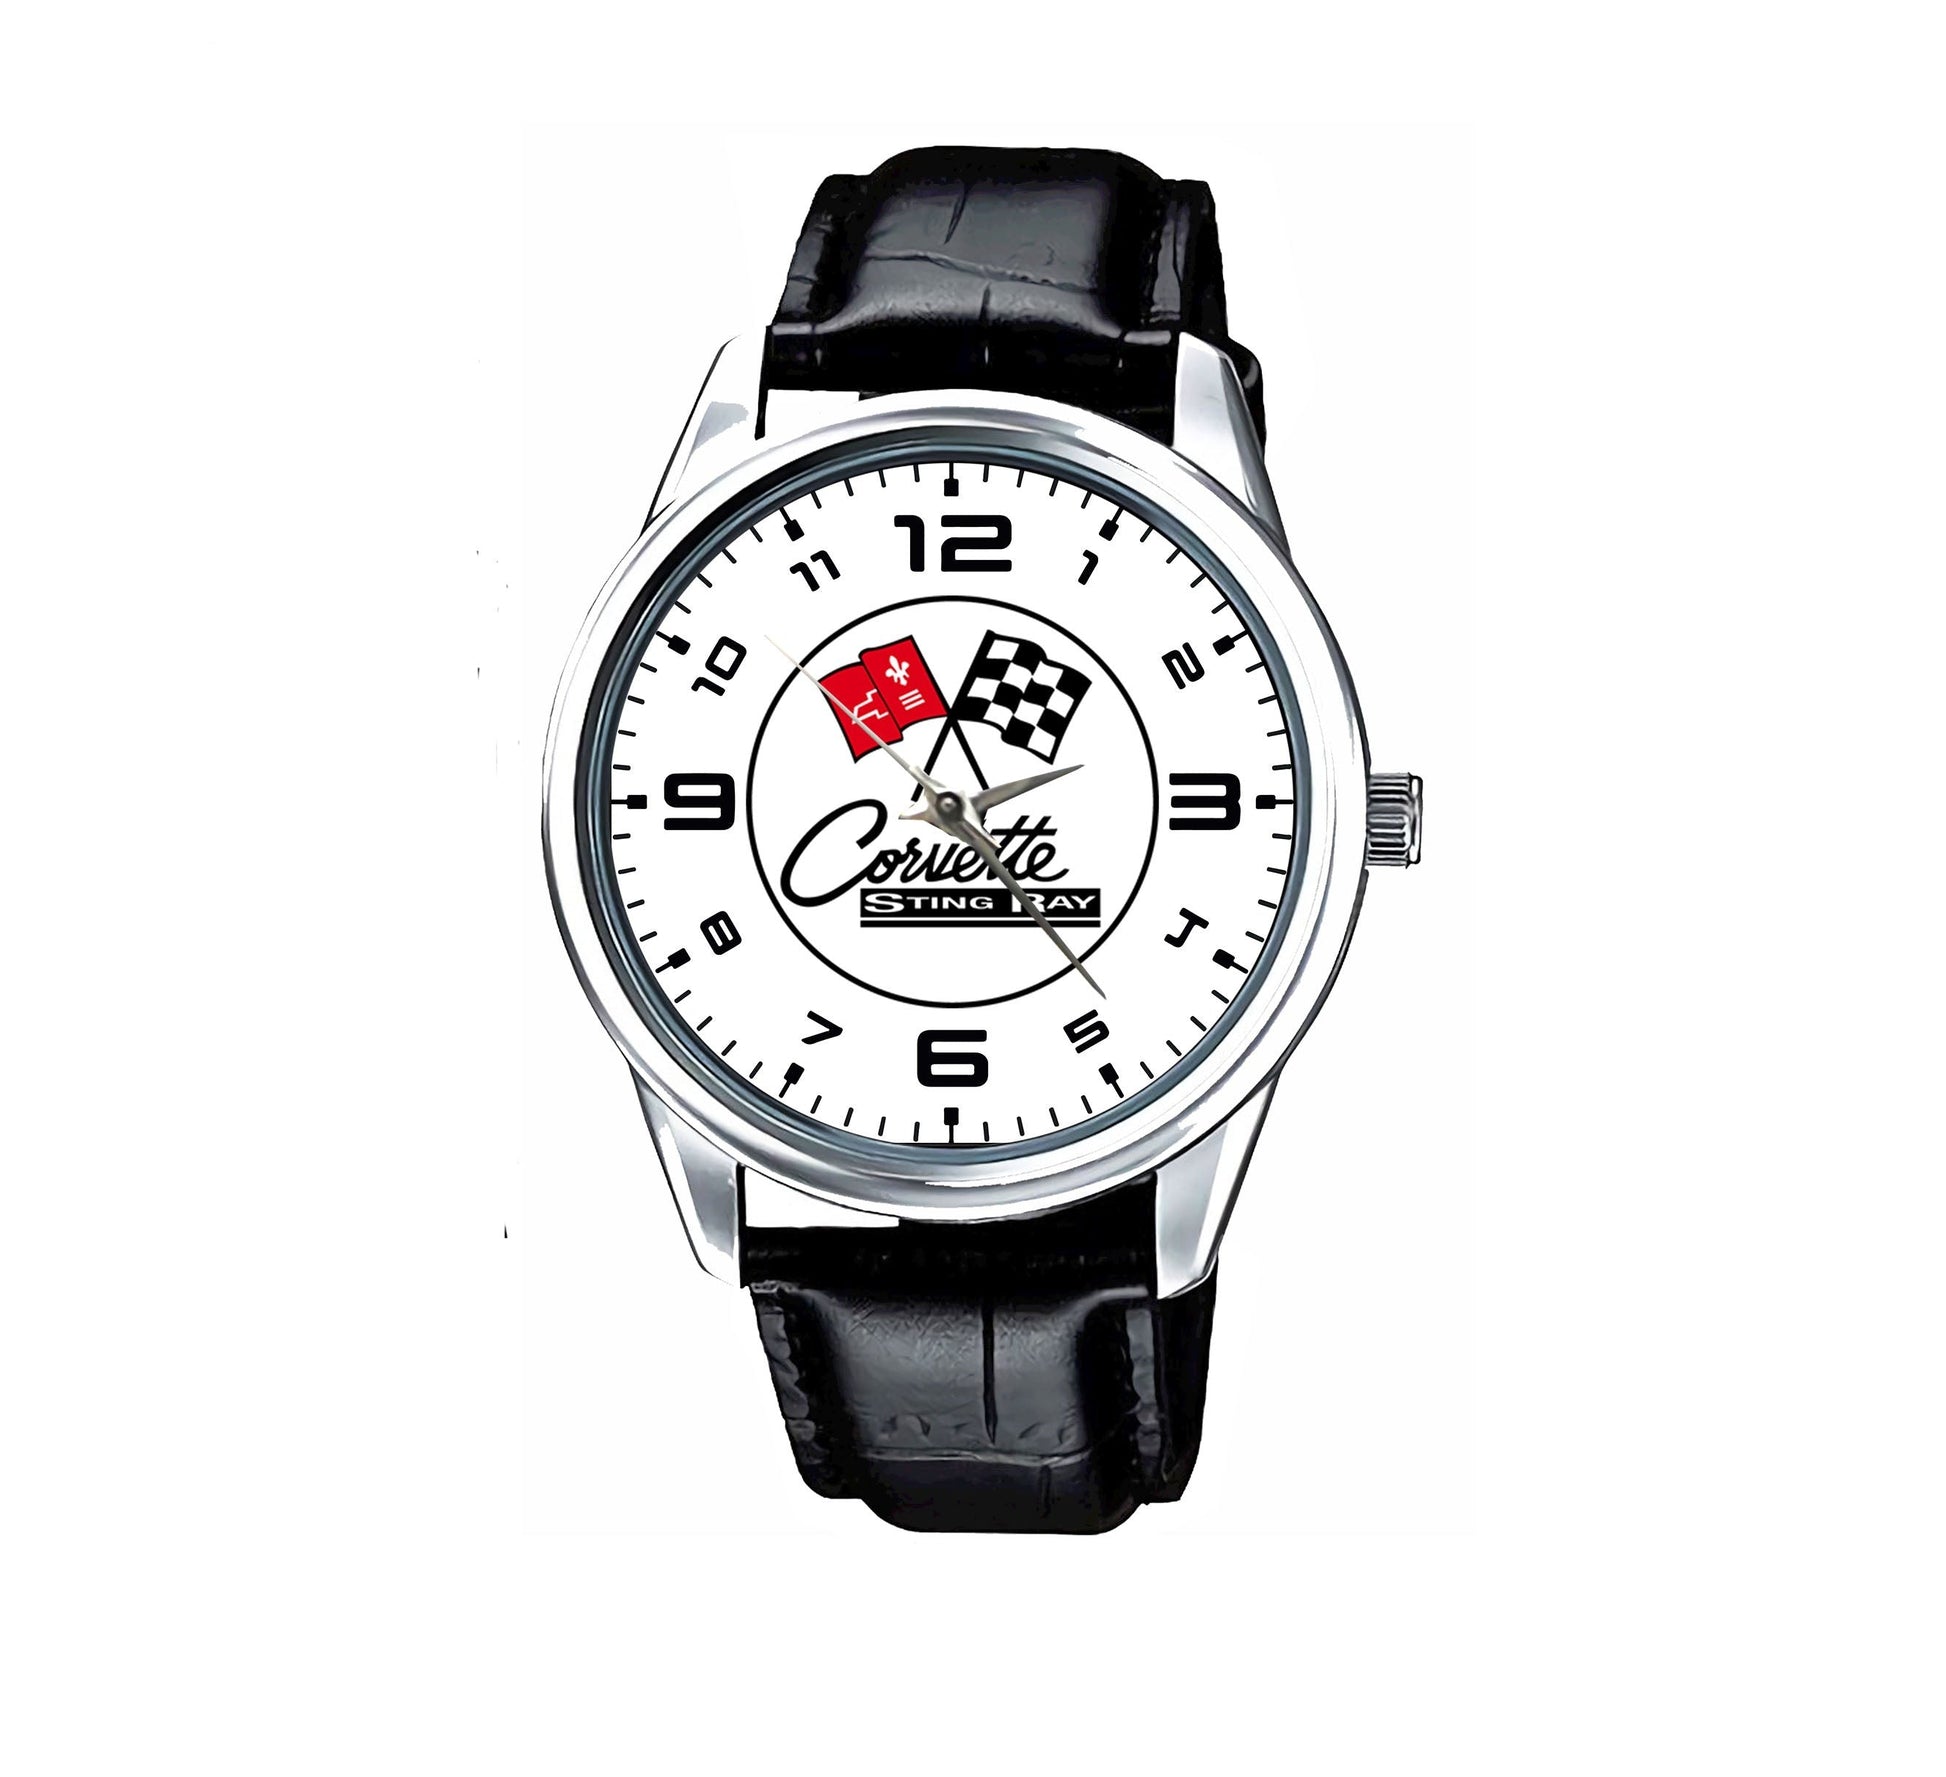 Corvette Sting Ray Watches Bdk46-A11